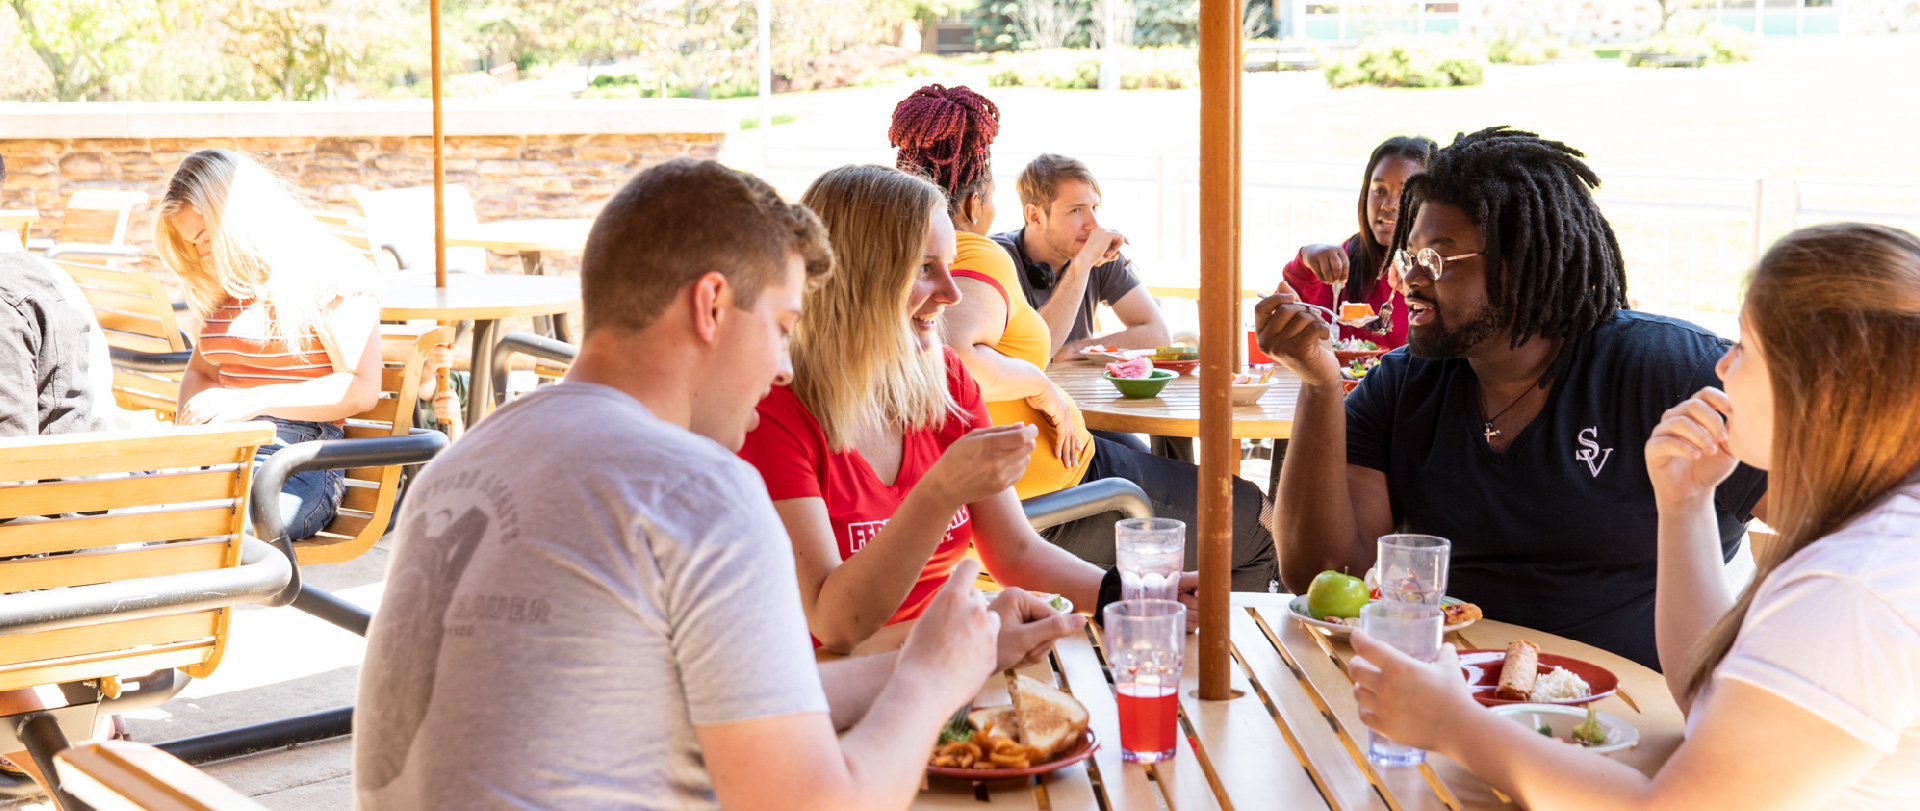 Students dining on the patio at The Rock Cafe on the campus of Ferris State University in Big Rapids, MI